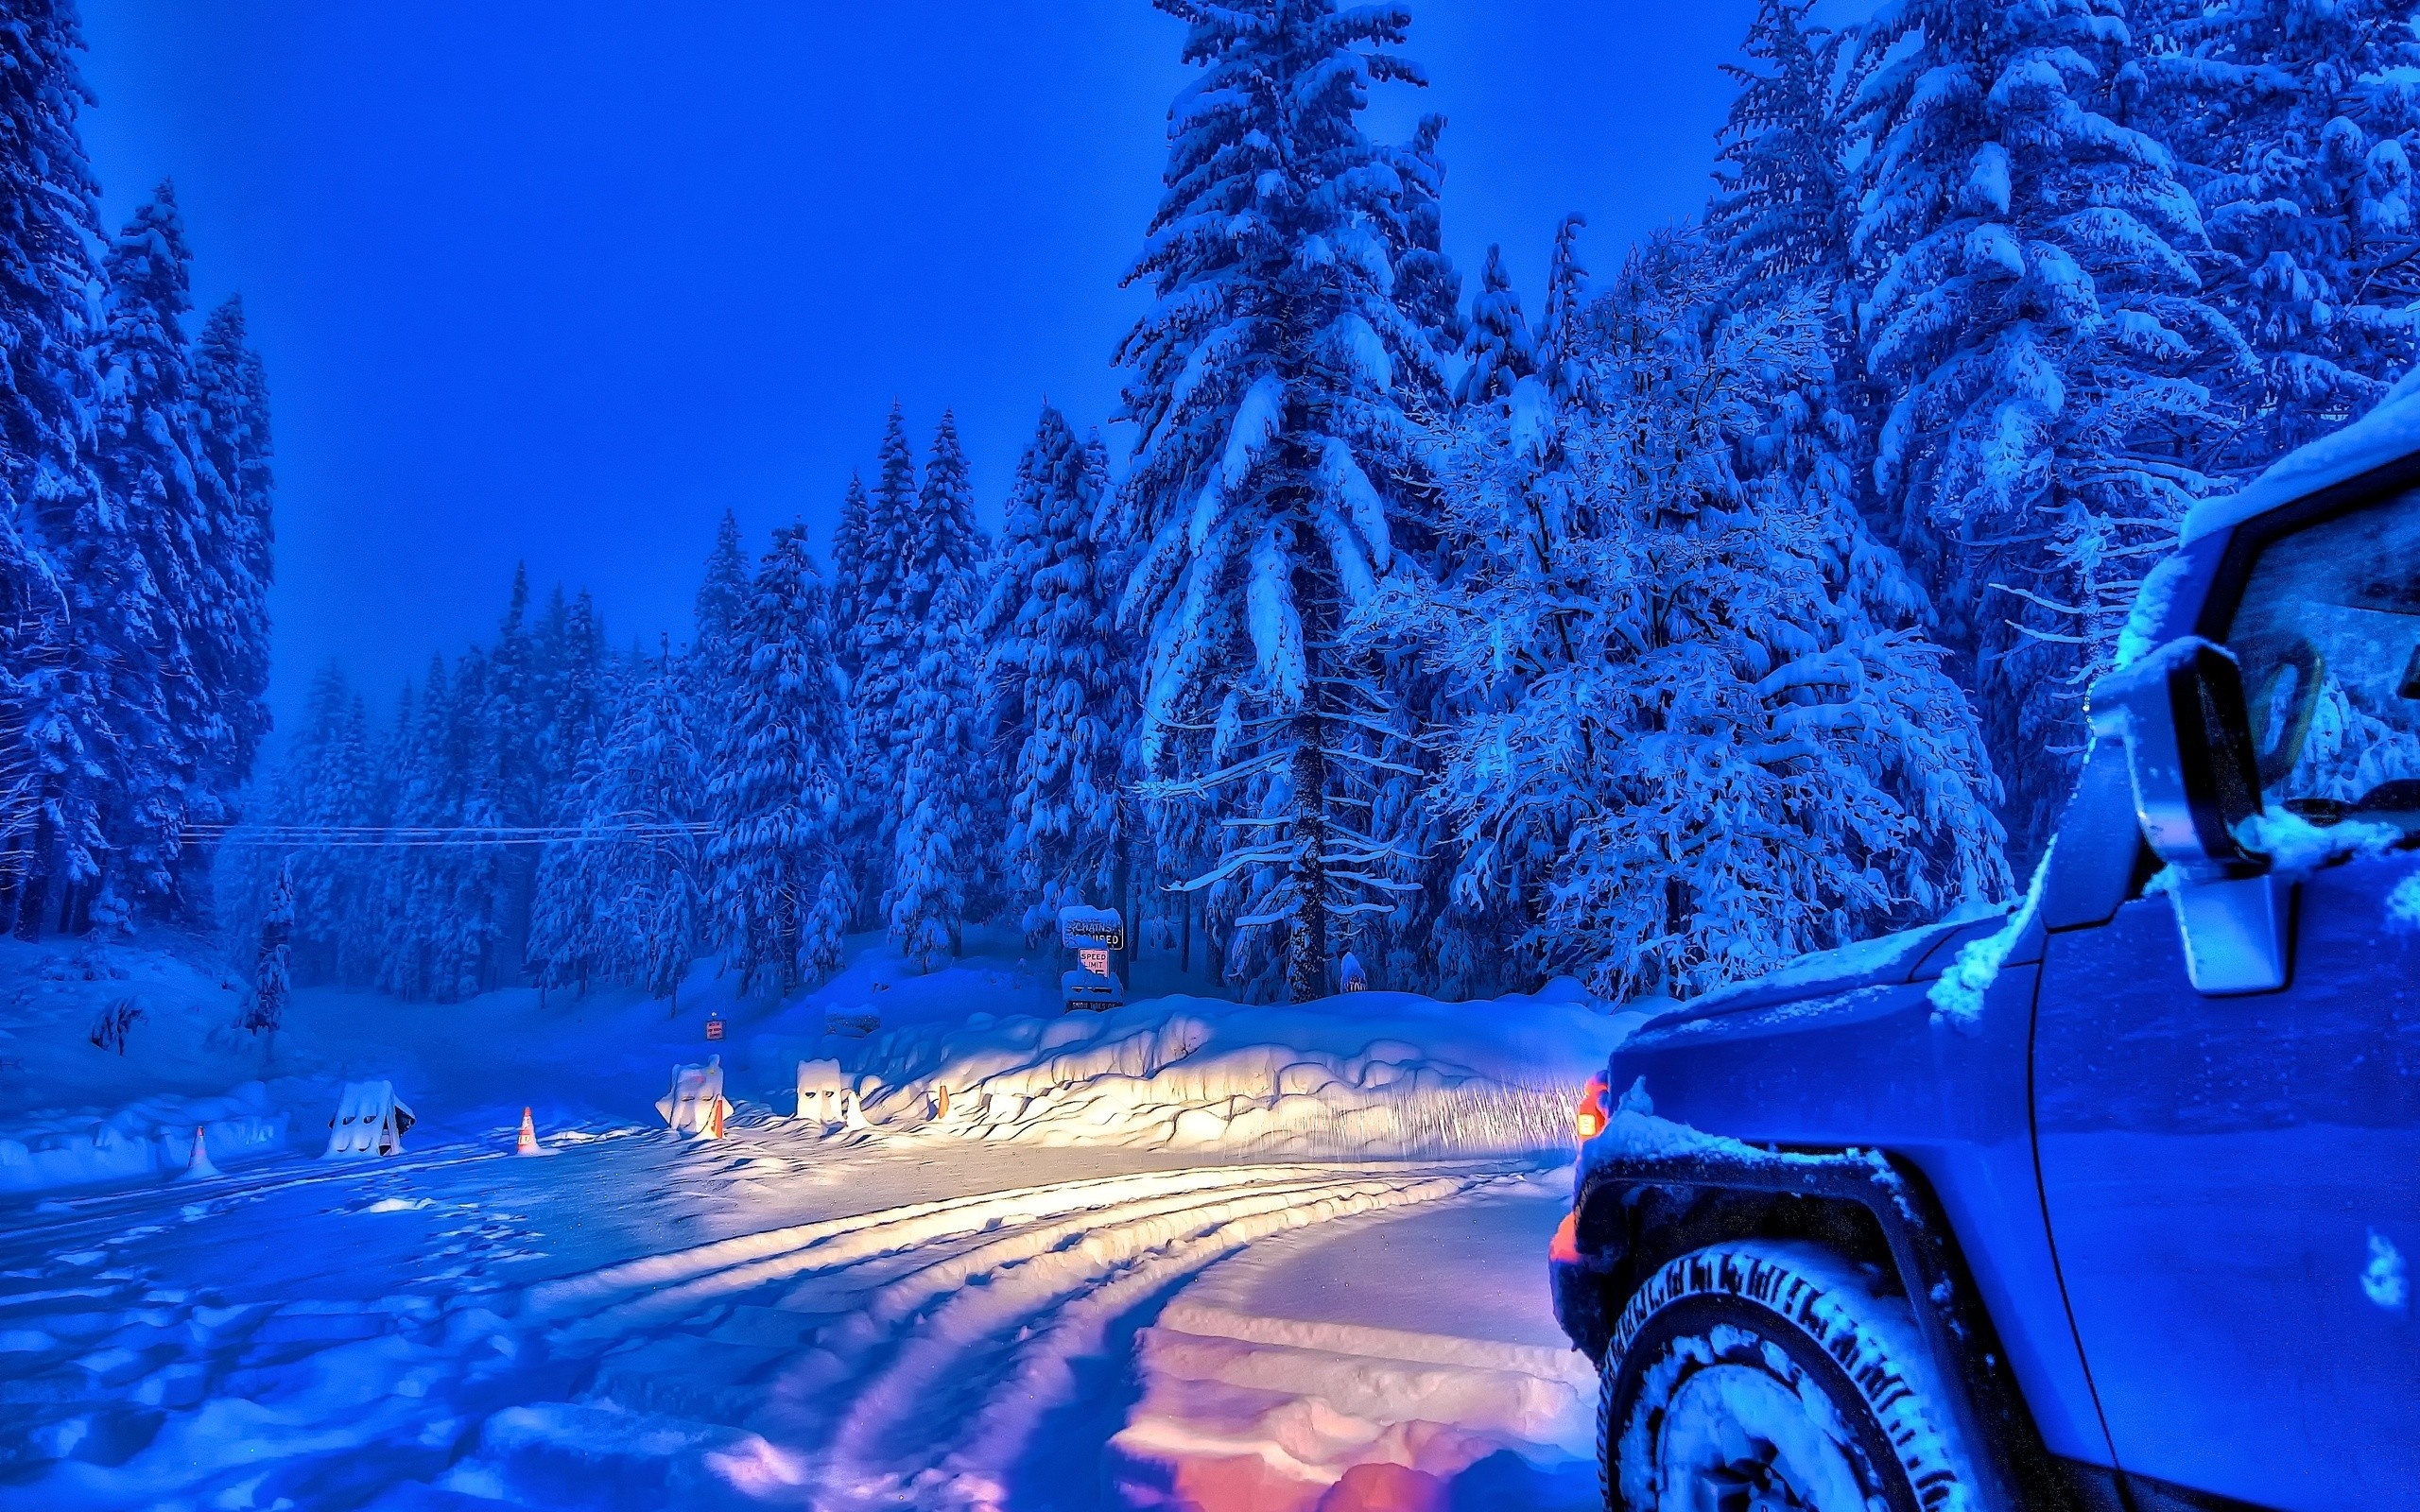 General 2560x1600 forest car sky snow winter vehicle cold outdoors trees